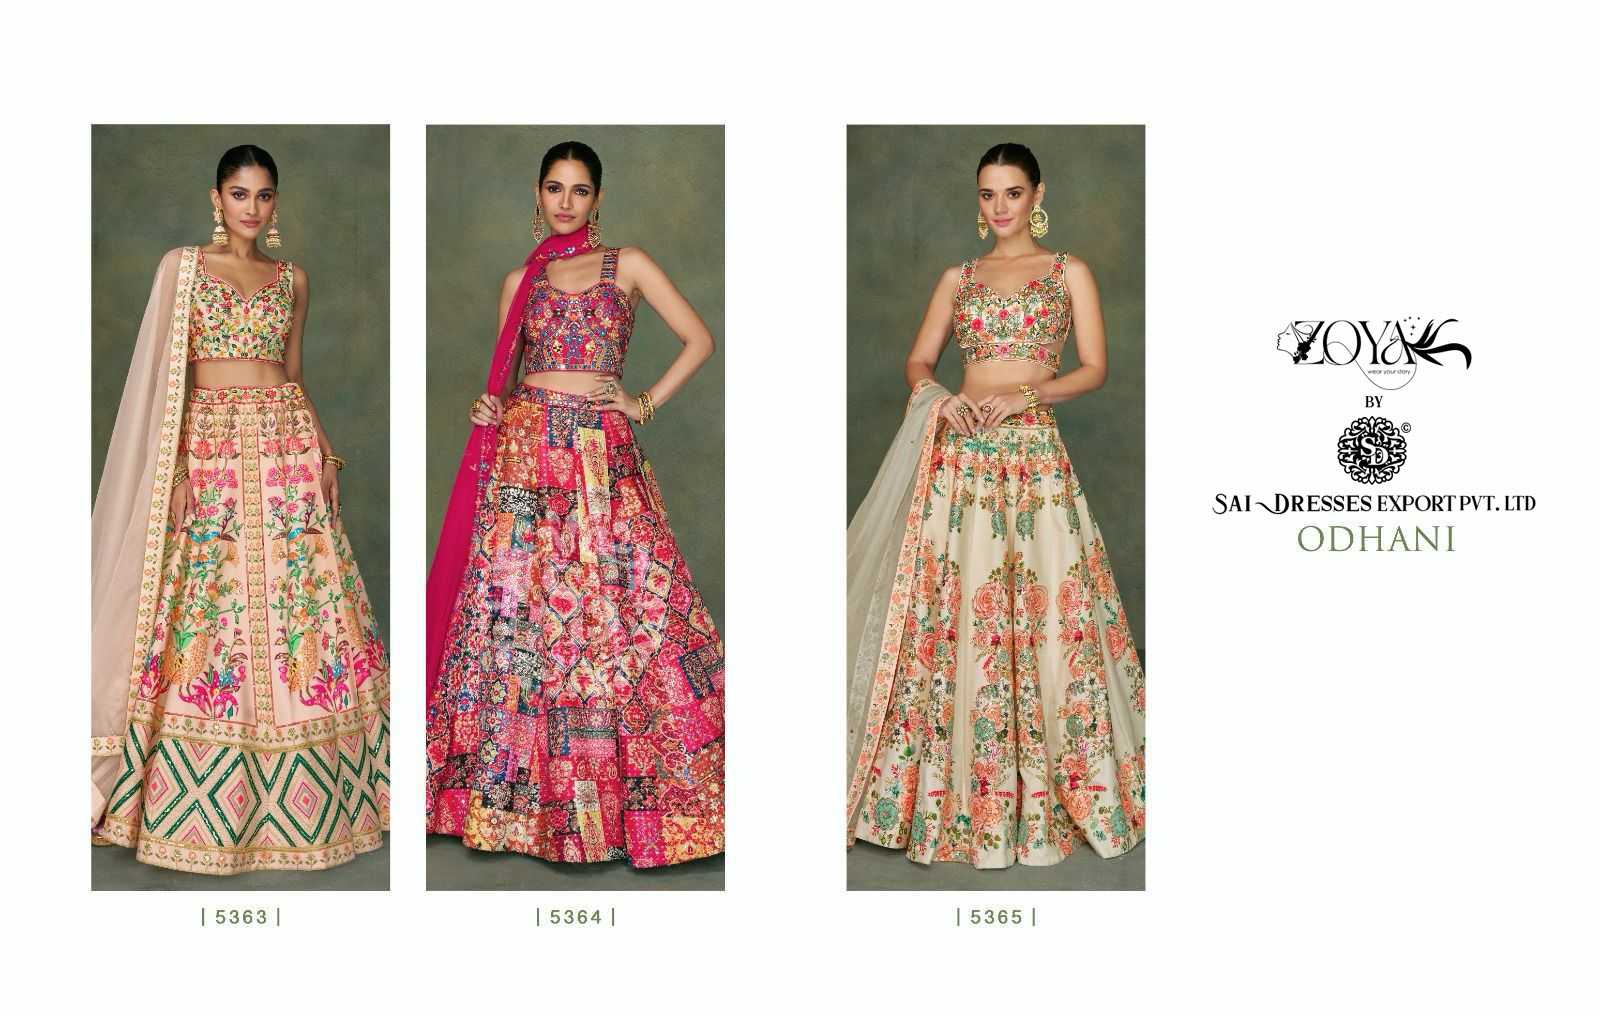 SAI DRESSES PRESENT ODHANI READYMADE WEDDING WEAR HEAVY DESIGNER SUITS IN WHOLESALE RATE IN SURAT